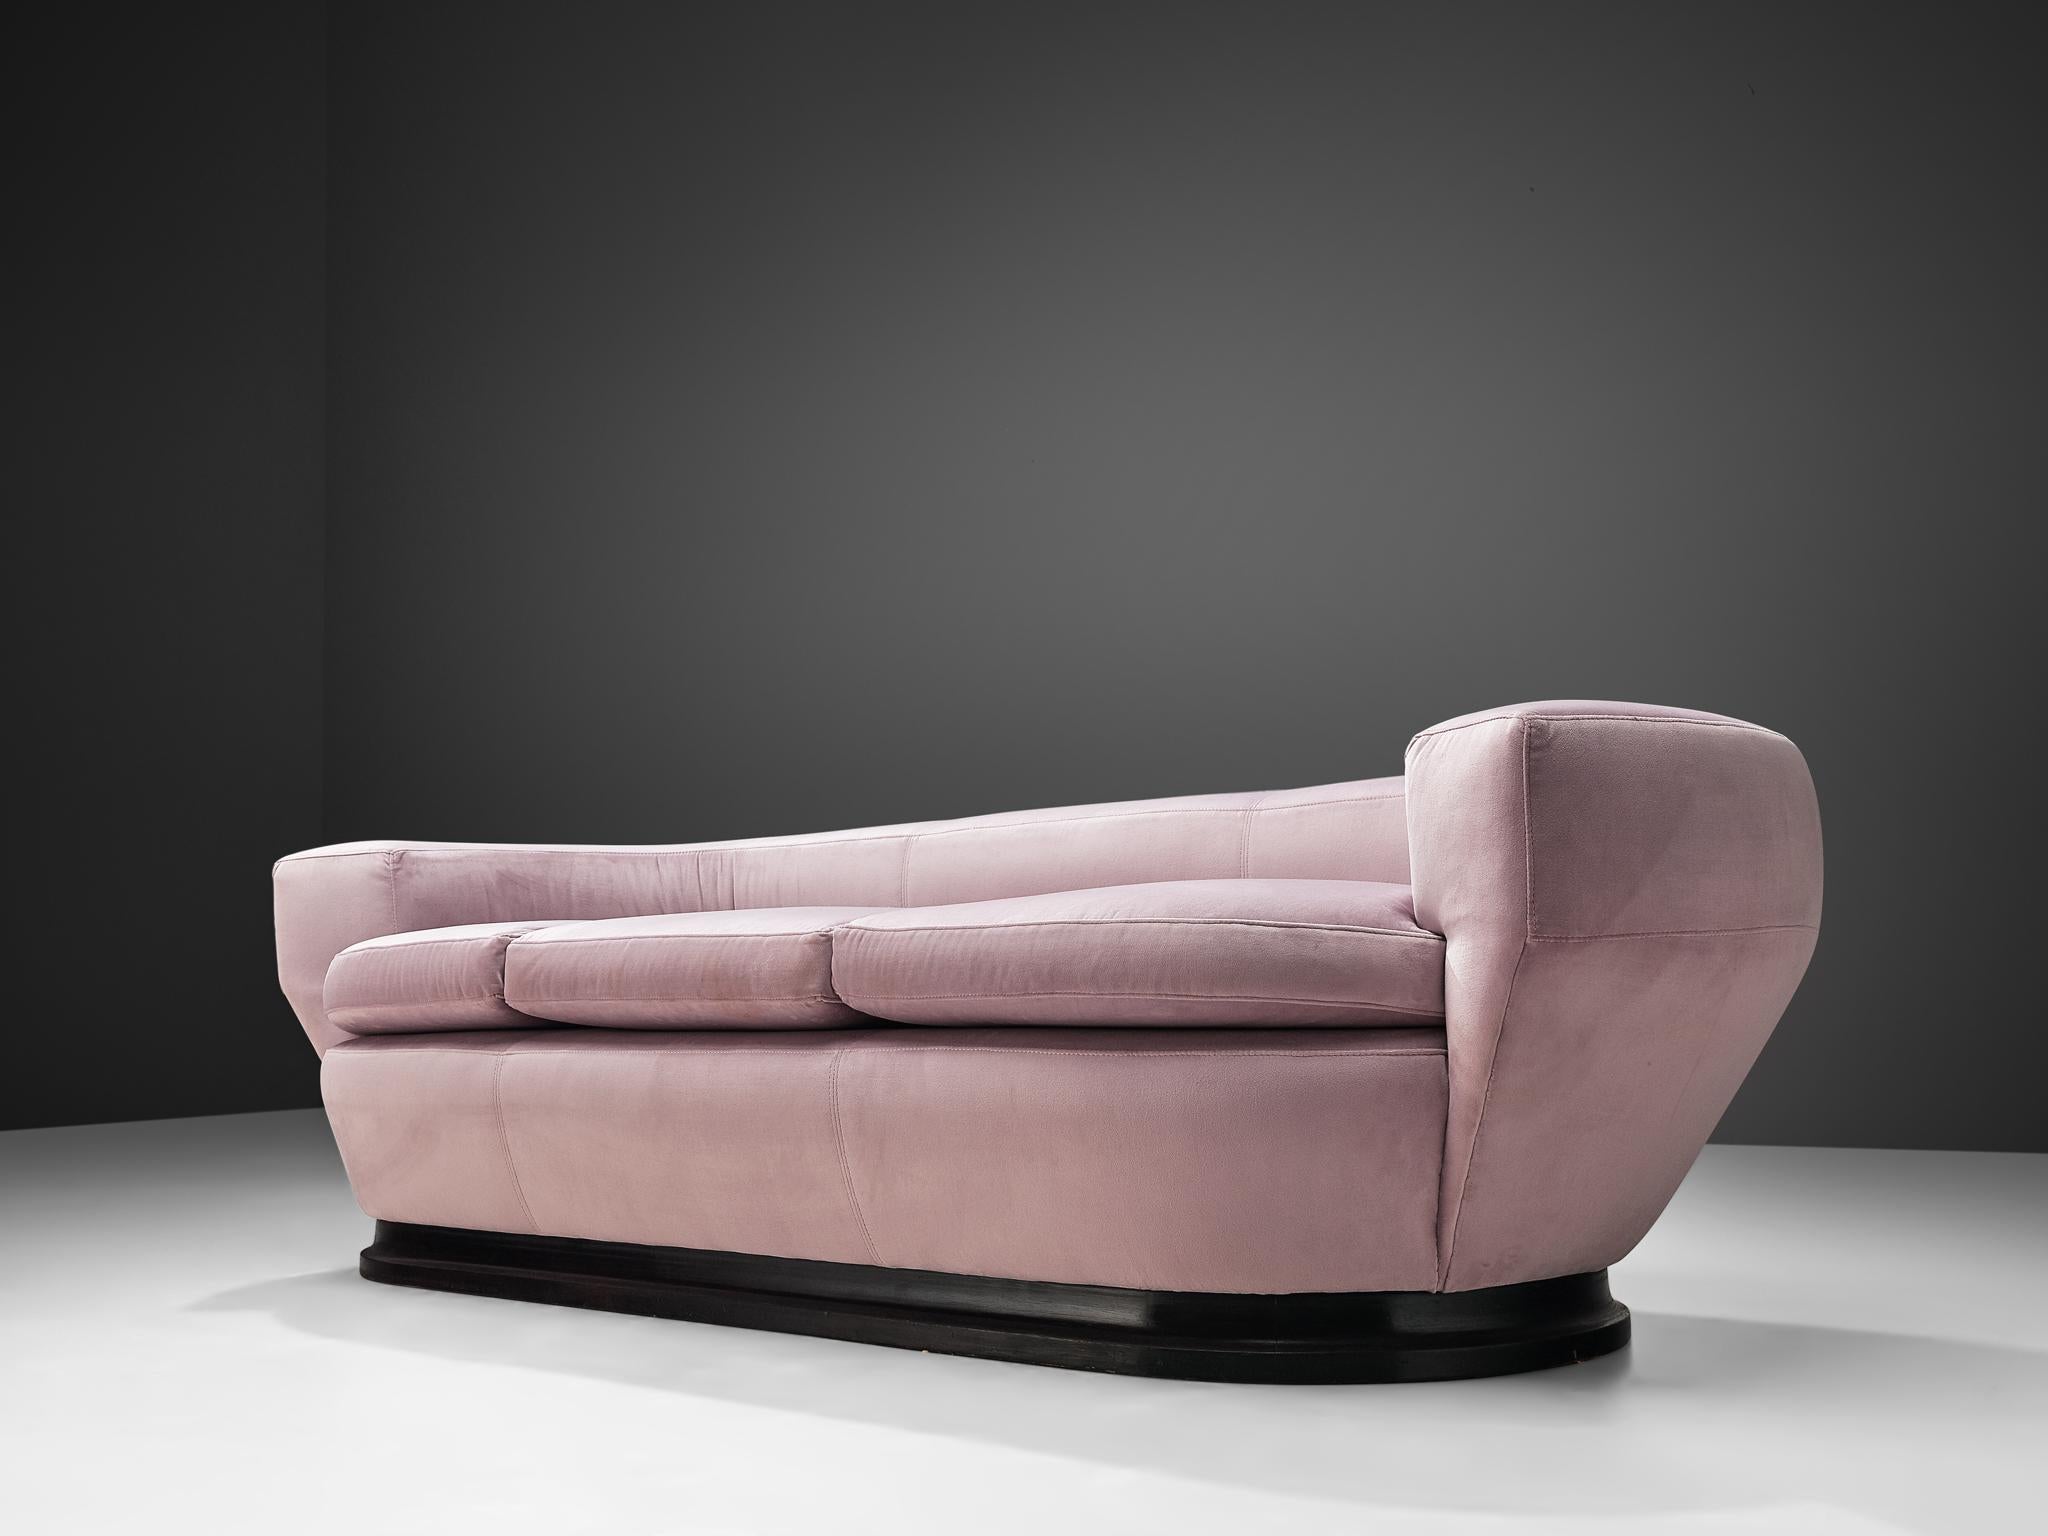 Mid-20th Century Italian Sofa in Soft Pink Upholstery  For Sale